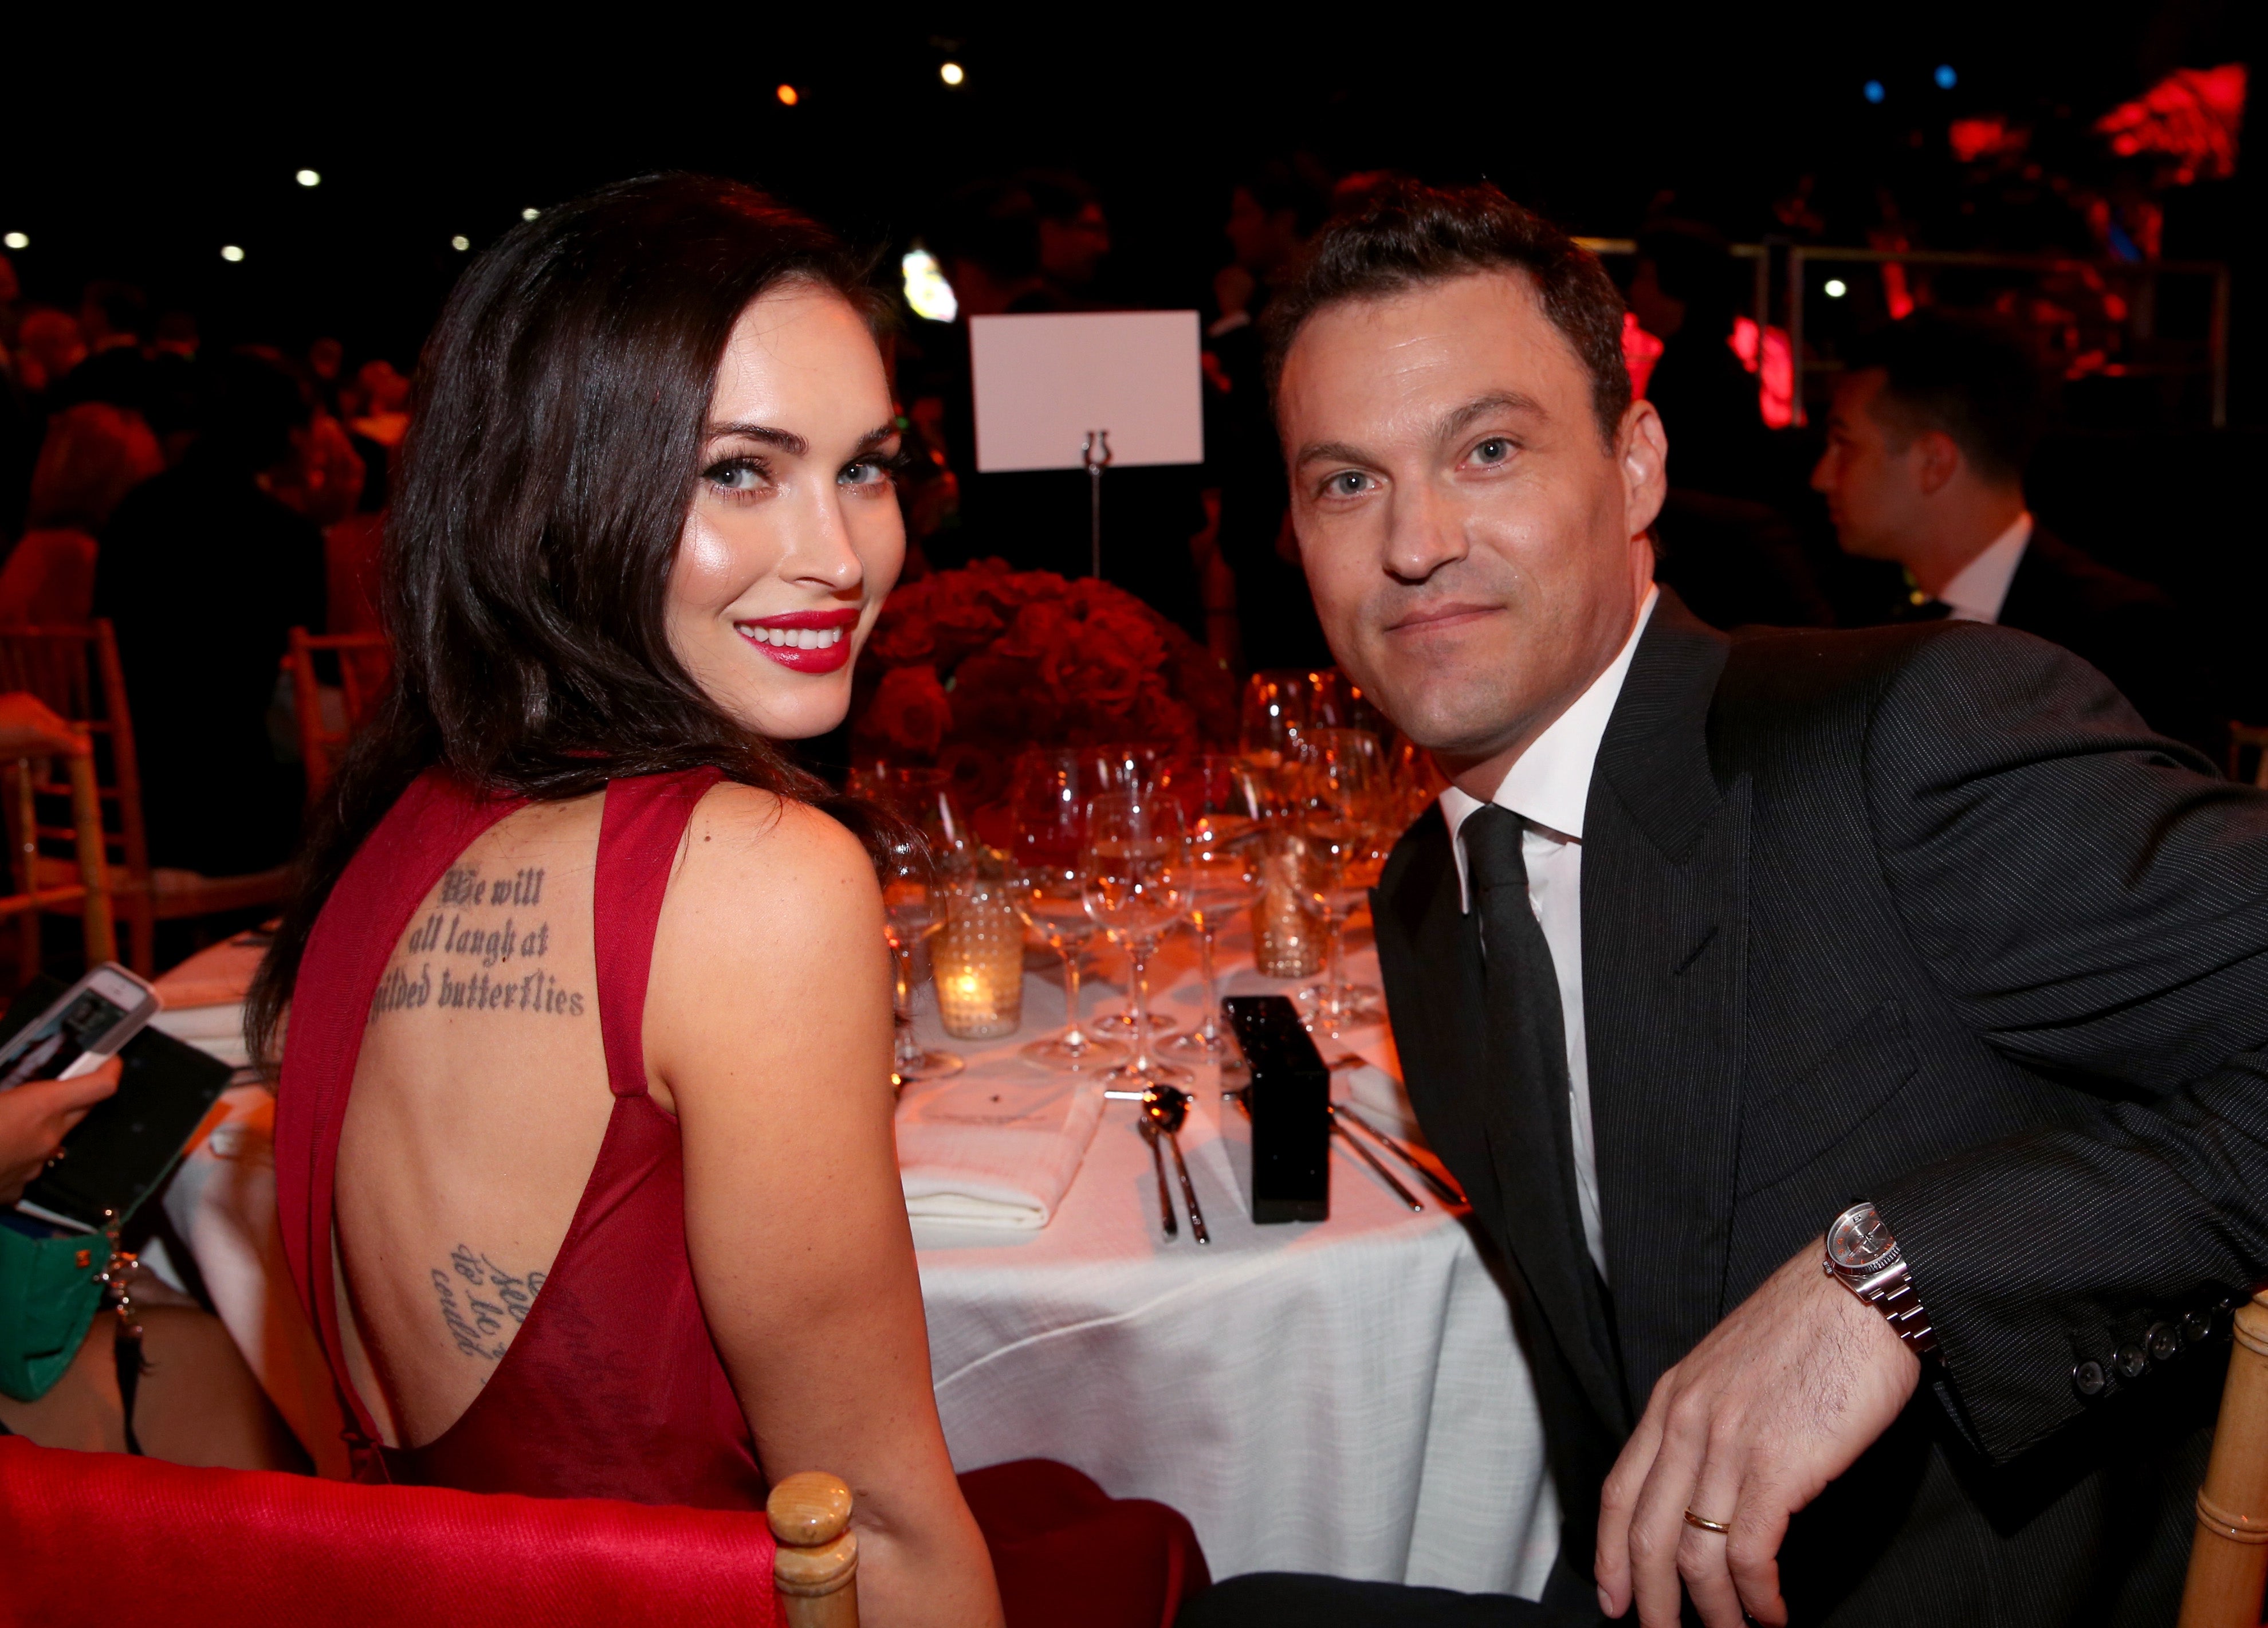 Megan Fox and Brian Austin Green were married from 2010 to 2021